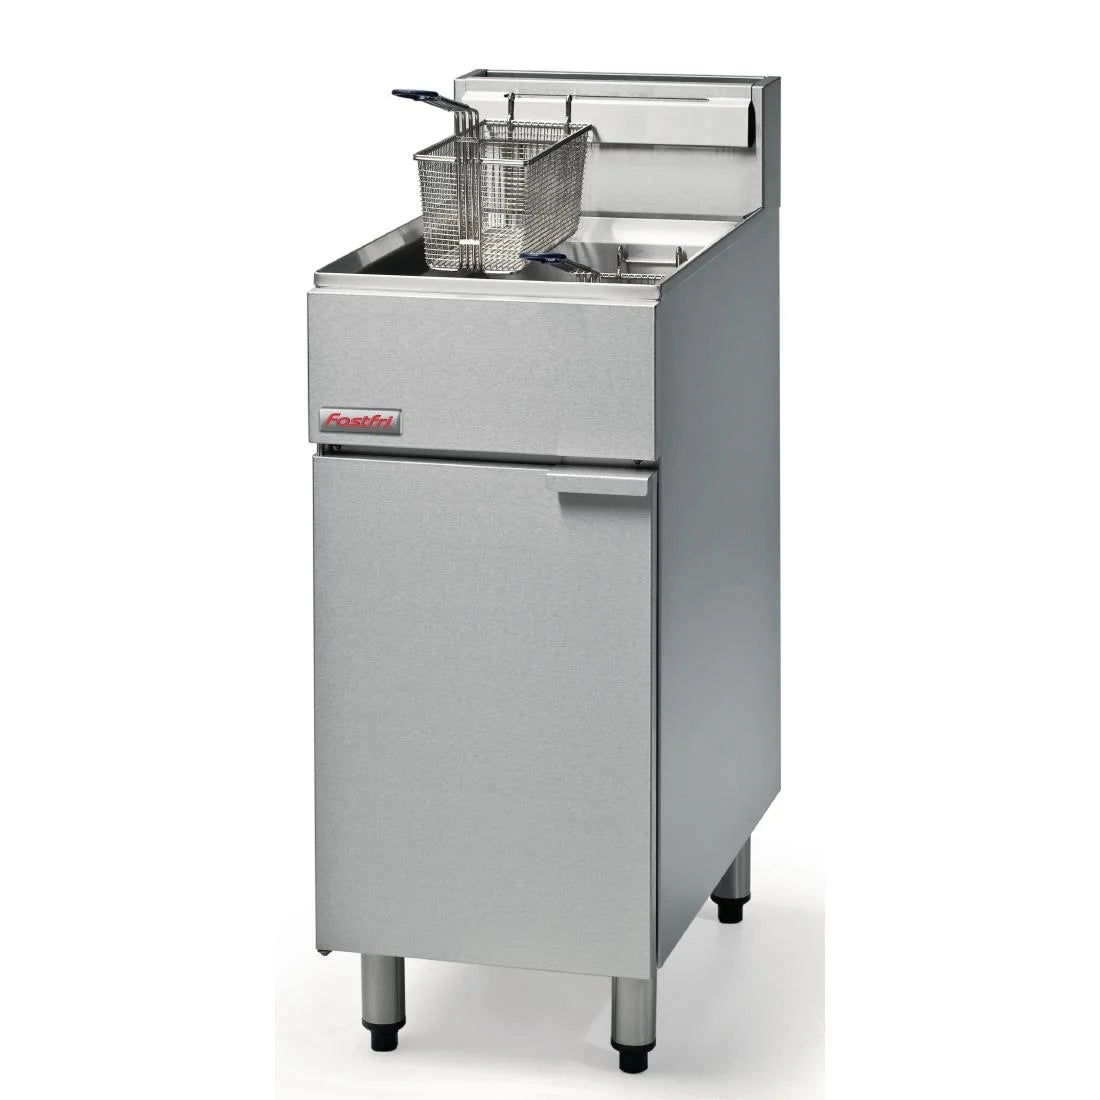 Blue Seal FF18 Fastfri Single Tank Twin Basket Free Standing Natural Gas Fryer.Product Ref:00479.MODEL:FF18. 🚚 3-5 DAYS Delivery